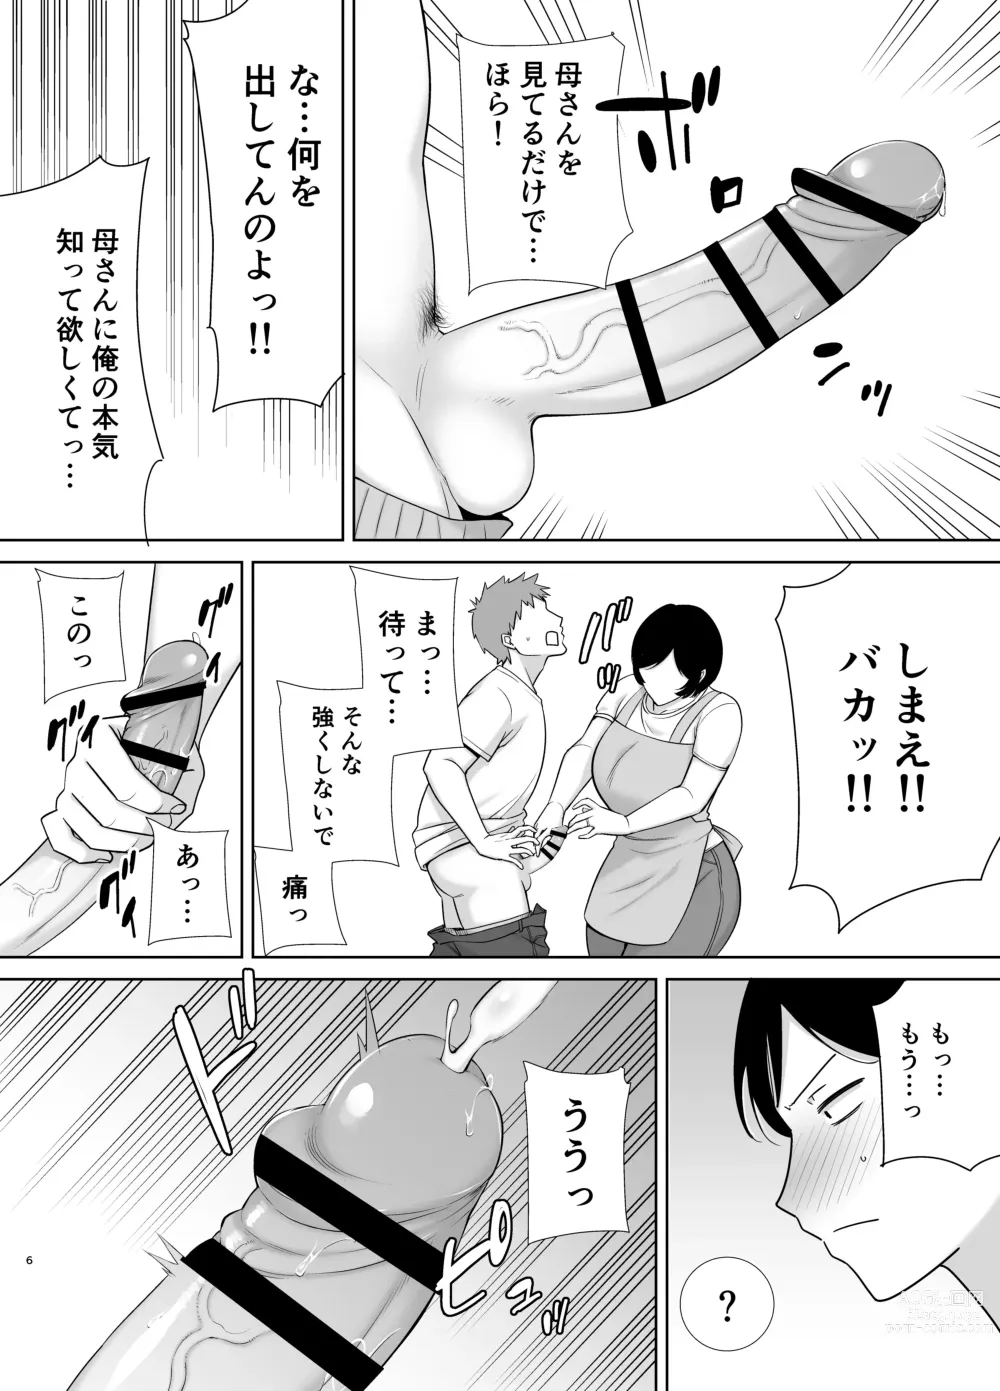 Page 5 of doujinshi 母さんだって女なんだよ！